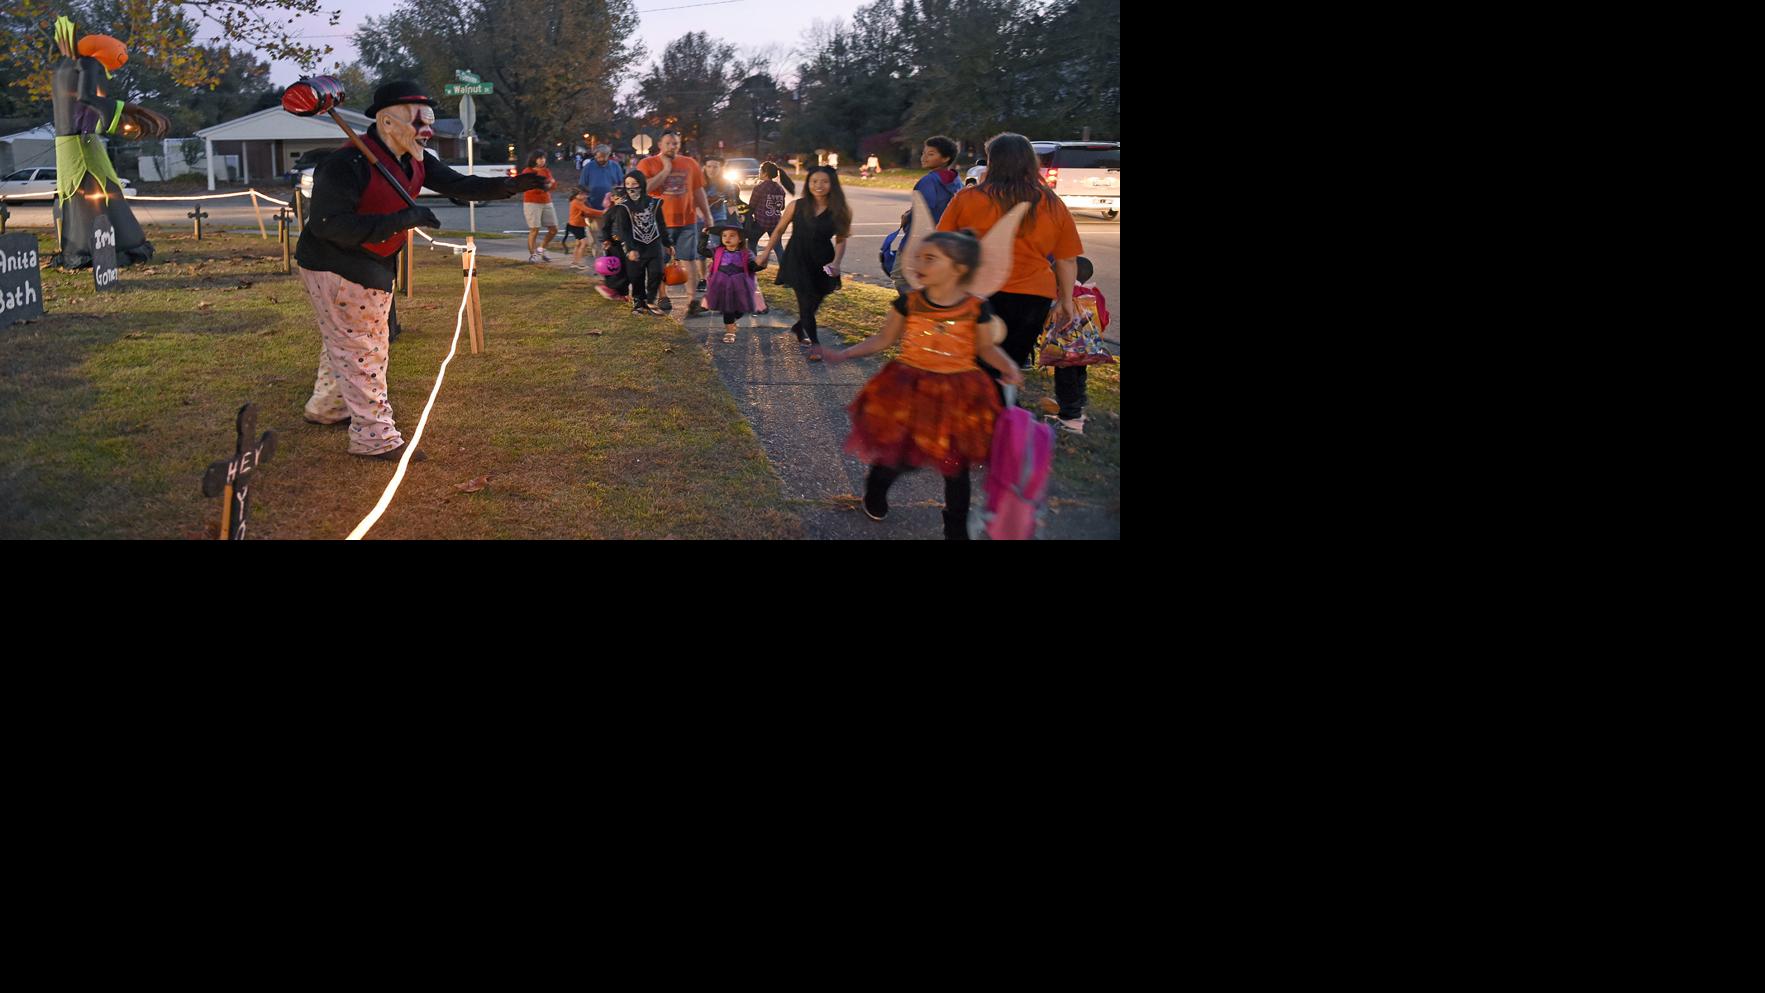 2017 trickortreat hours and Halloween events in Southern Illinois